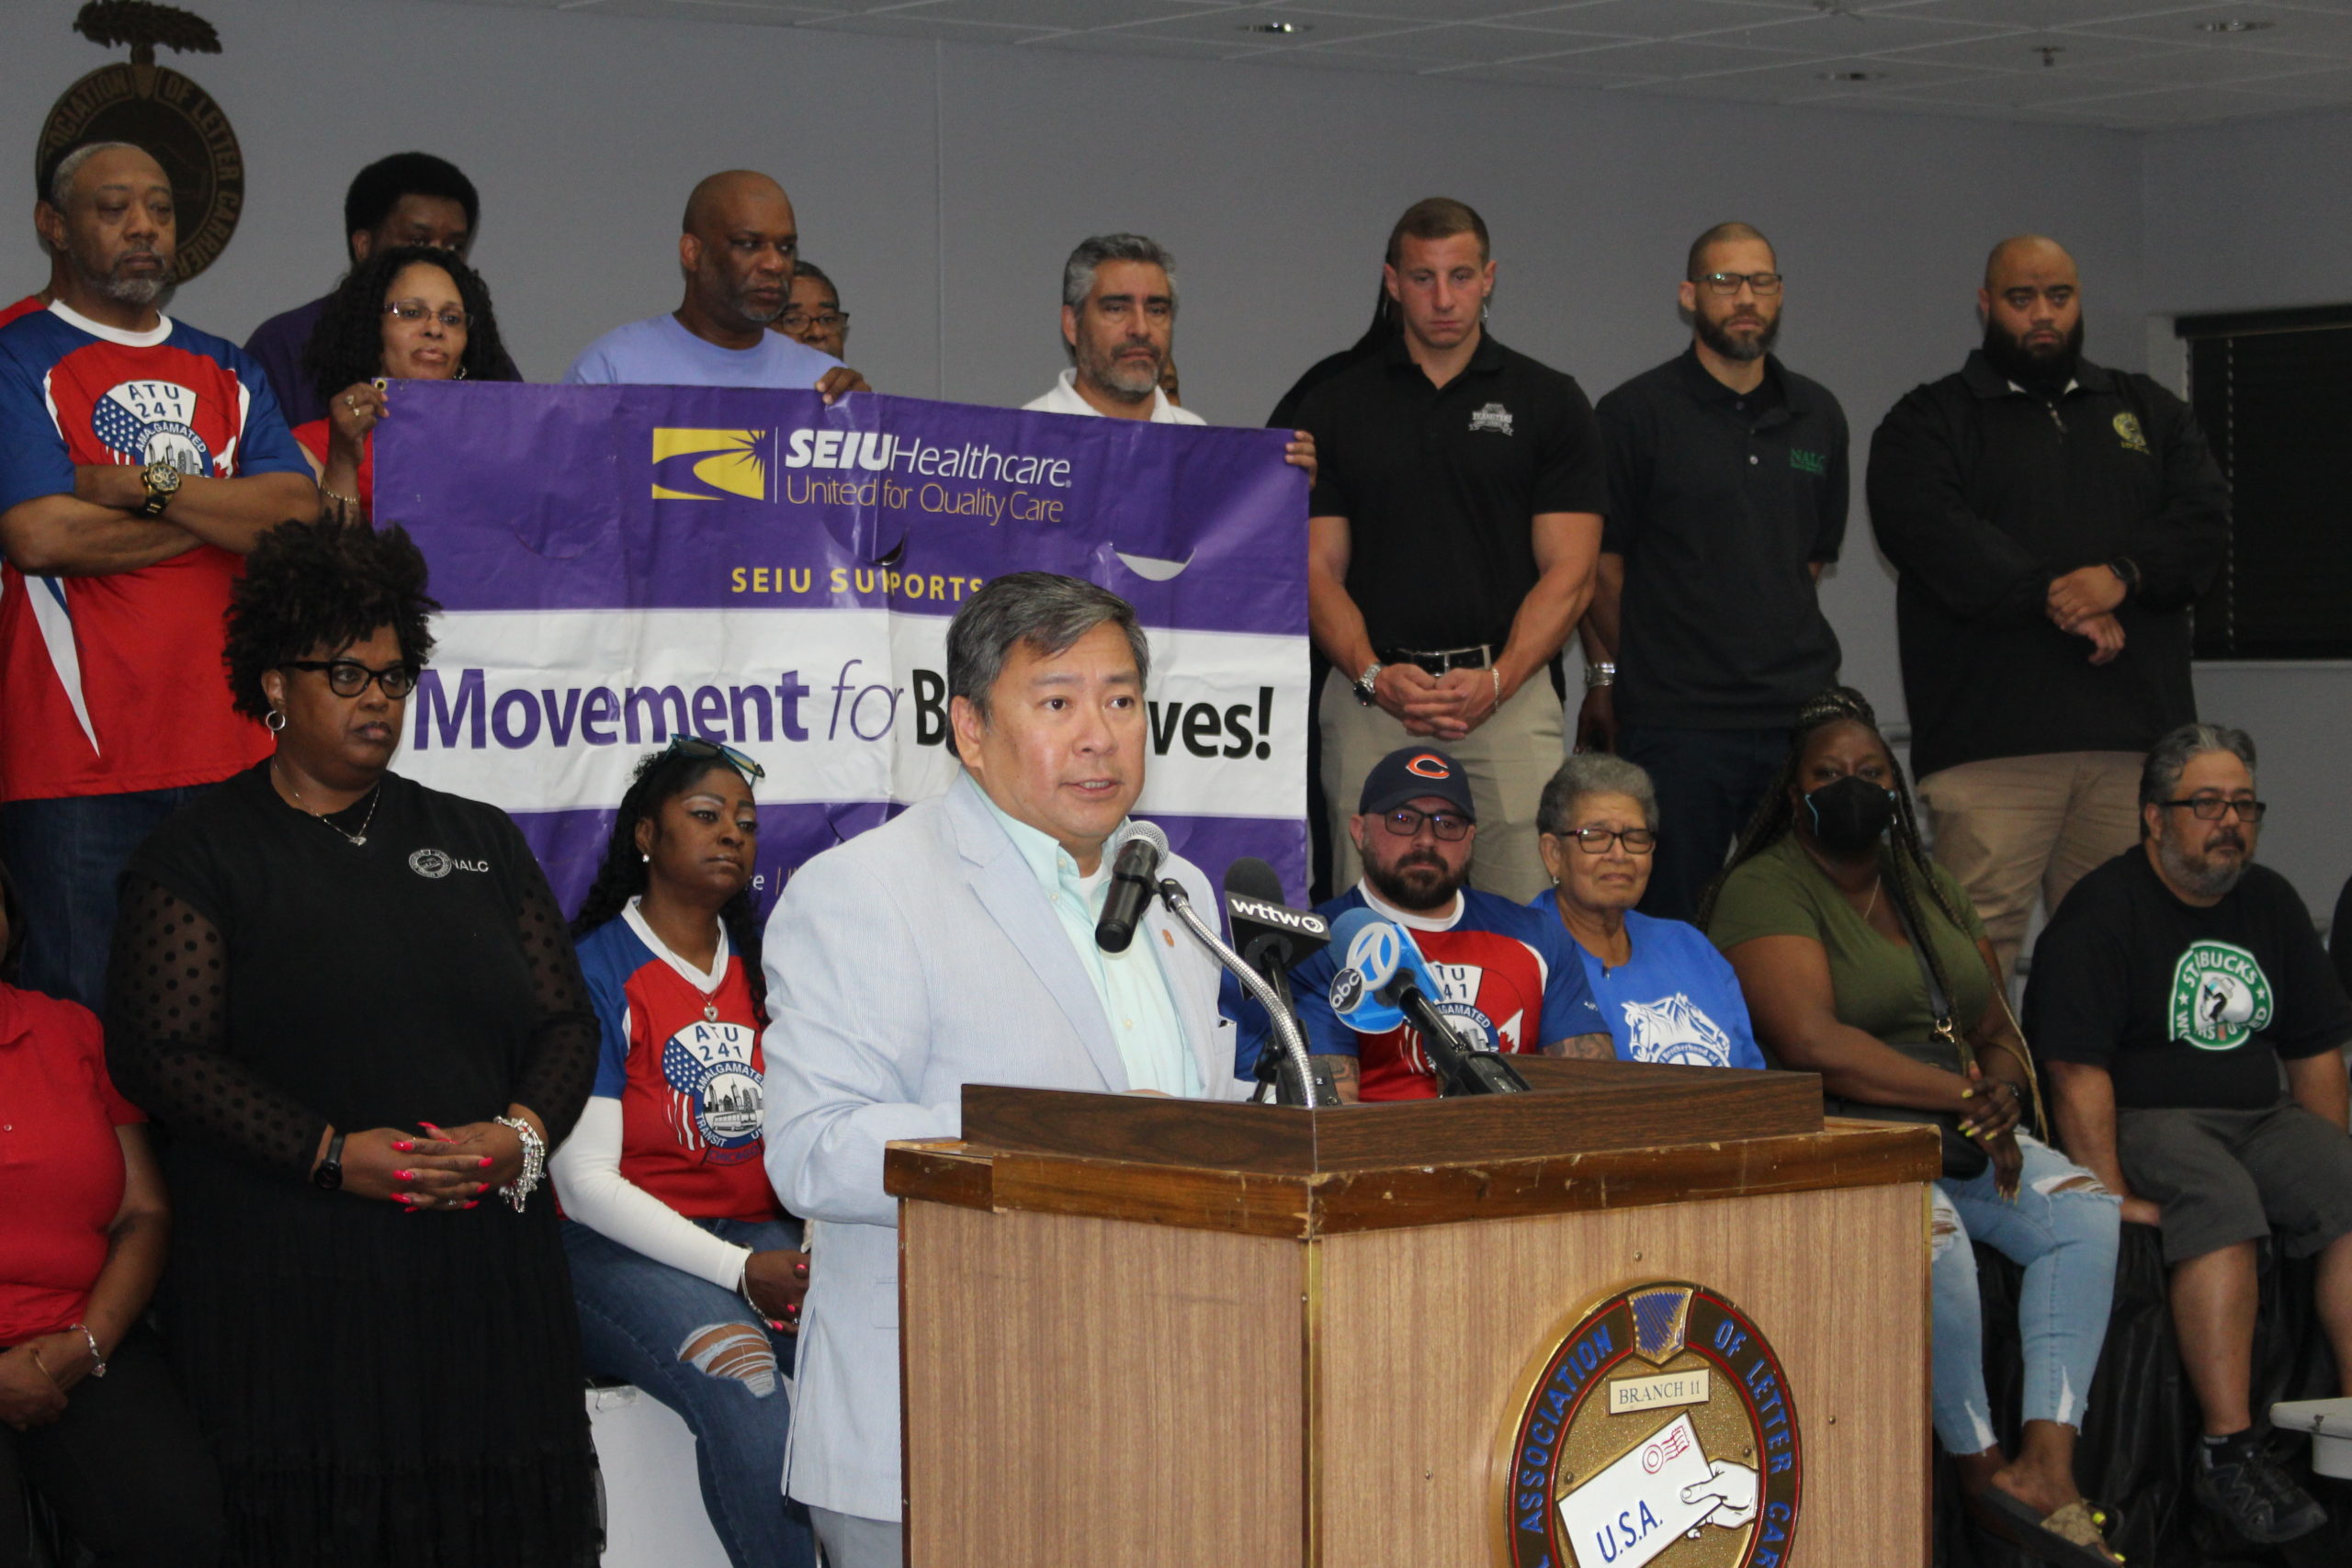 Chicago Federation of Labor Secretary-Treasurer Don V. Villar reads the CFL's Anti-violence Statement with the support of the Labor Movement behind him at NALC Bracnh 11 union hall press conference on June 24. 